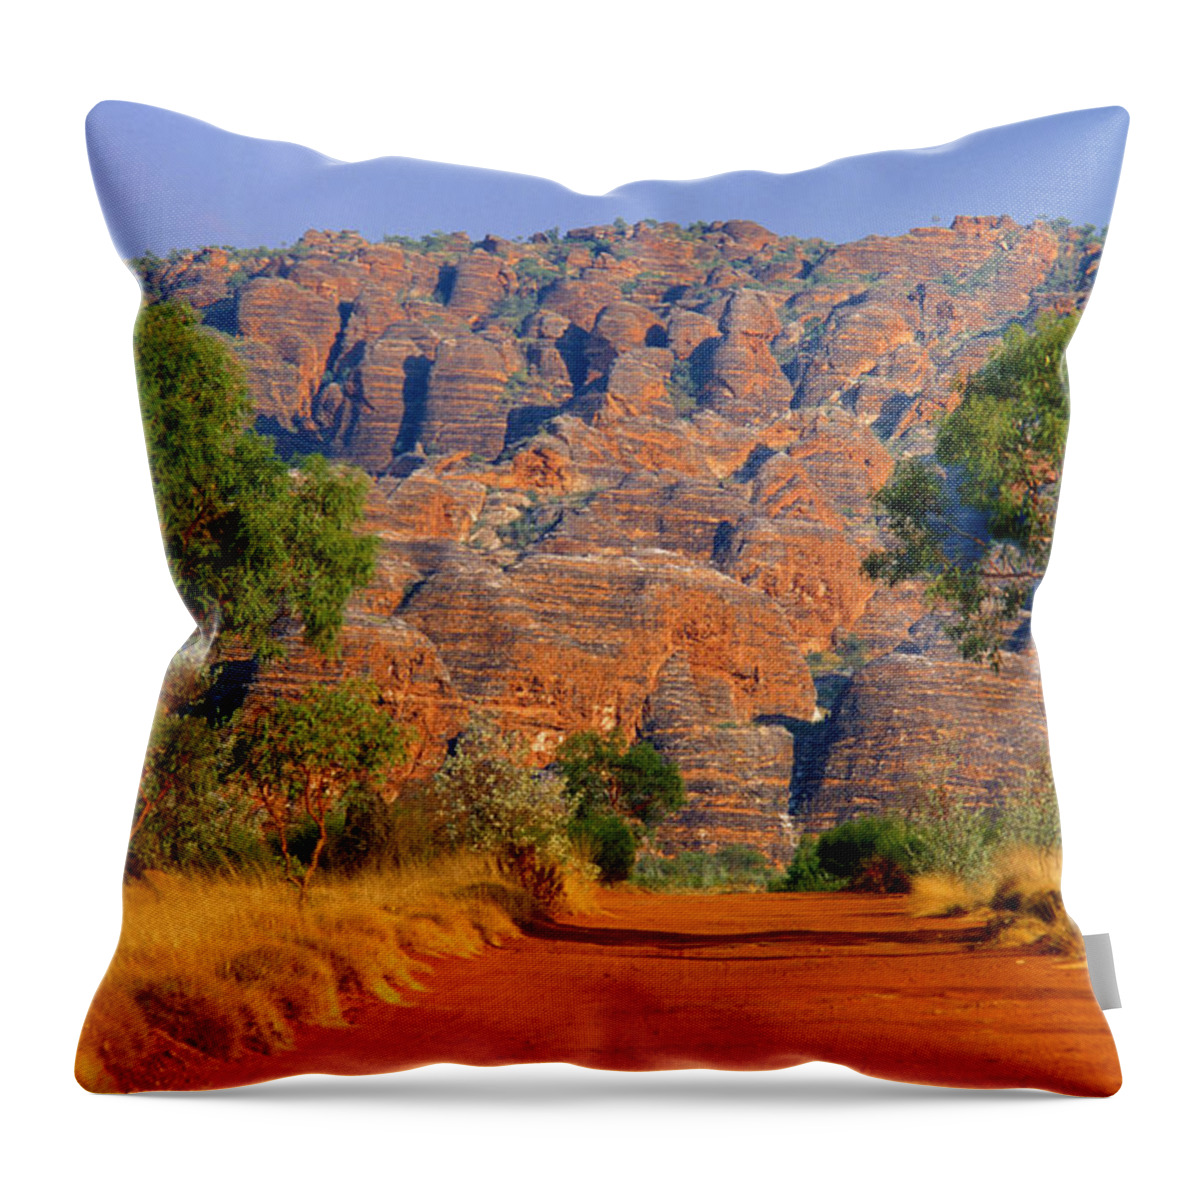 Scenics Throw Pillow featuring the photograph Natural Rock Formations Of Bungle by John Banagan